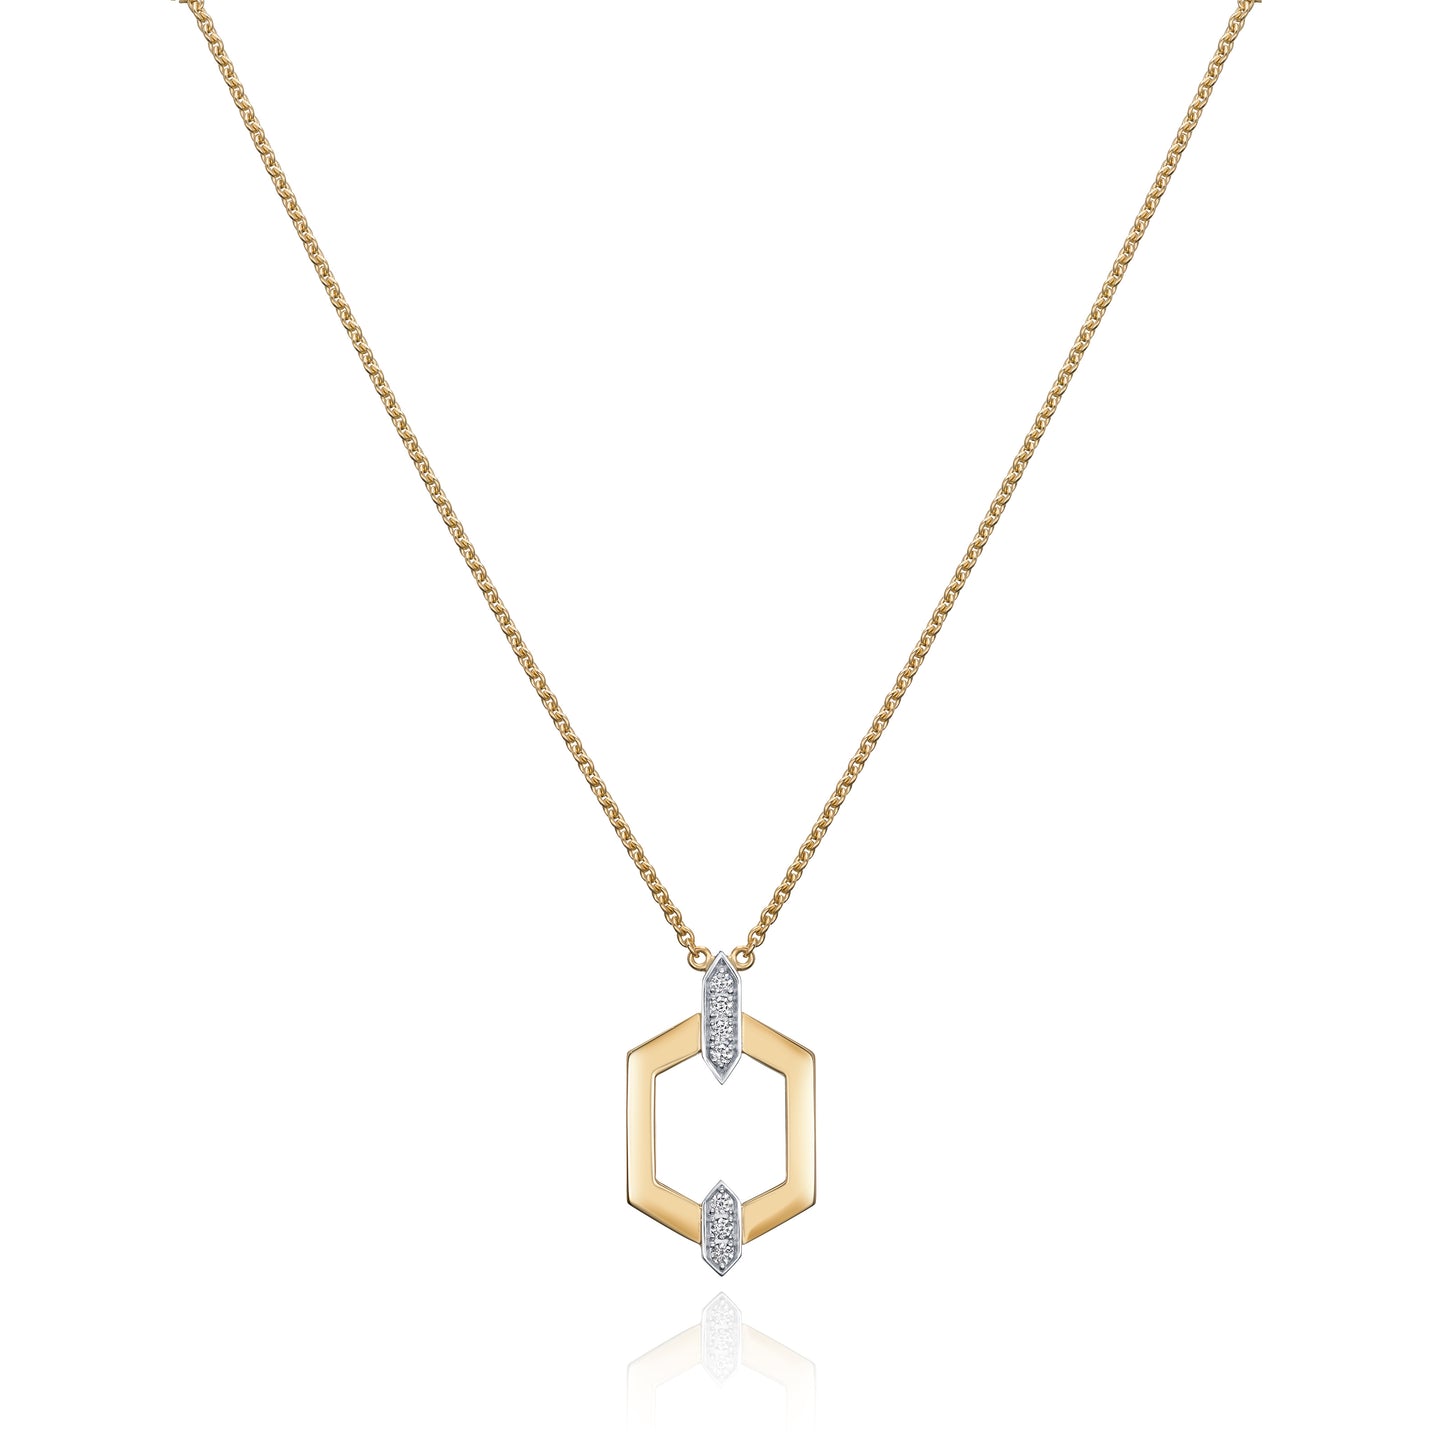 Nectar 18ct Yellow Gold Pendant With Diamond Set Accents